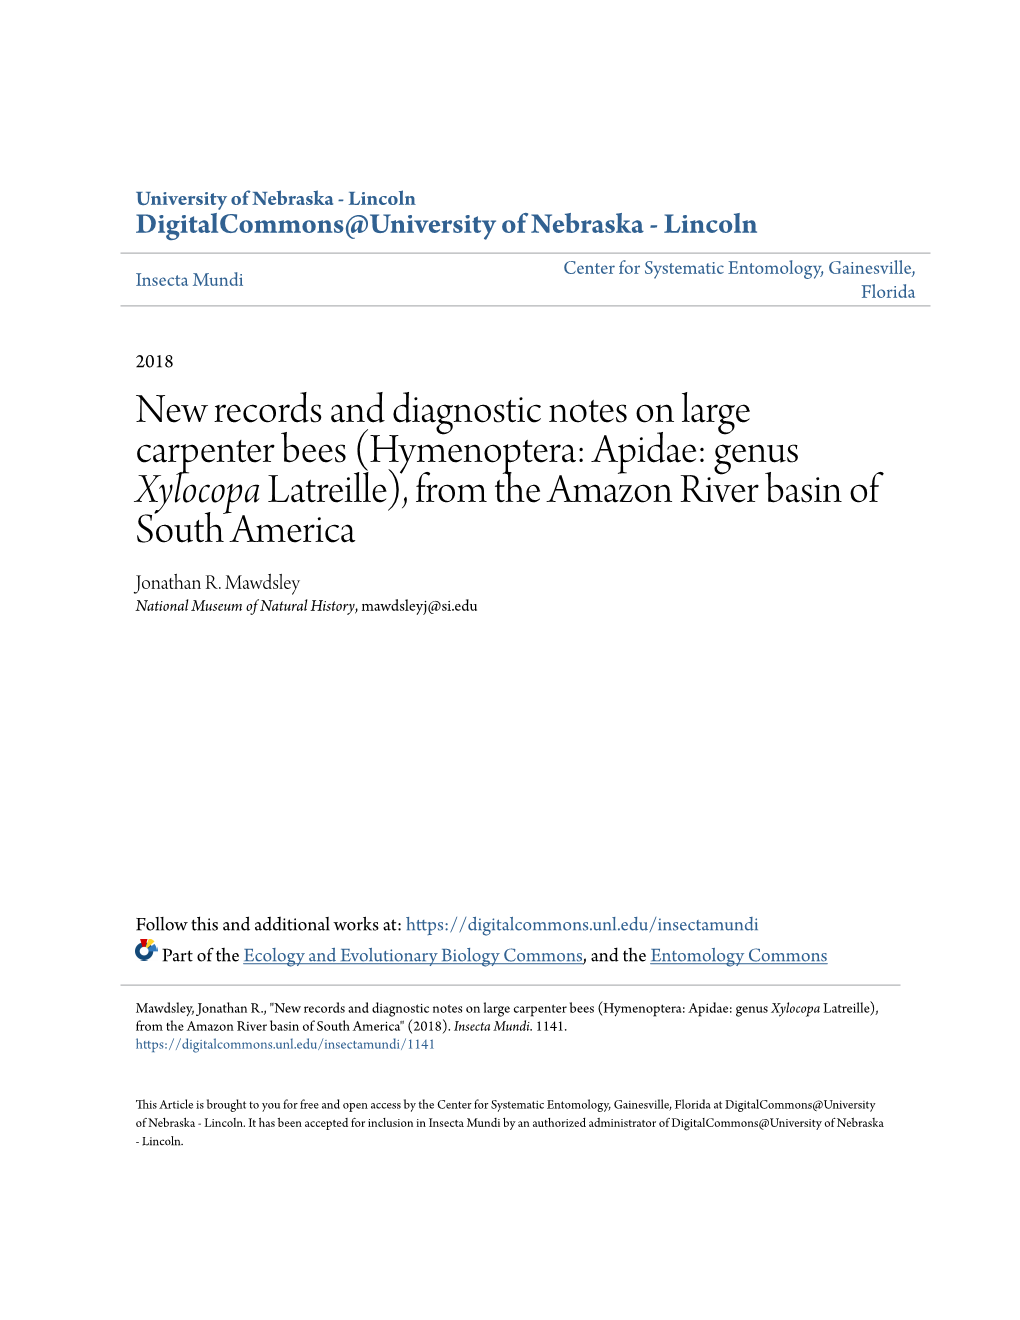 New Records and Diagnostic Notes on Large Carpenter Bees (Hymenoptera: Apidae: Genus Xylocopa Latreille), from the Amazon River Basin of South America Jonathan R